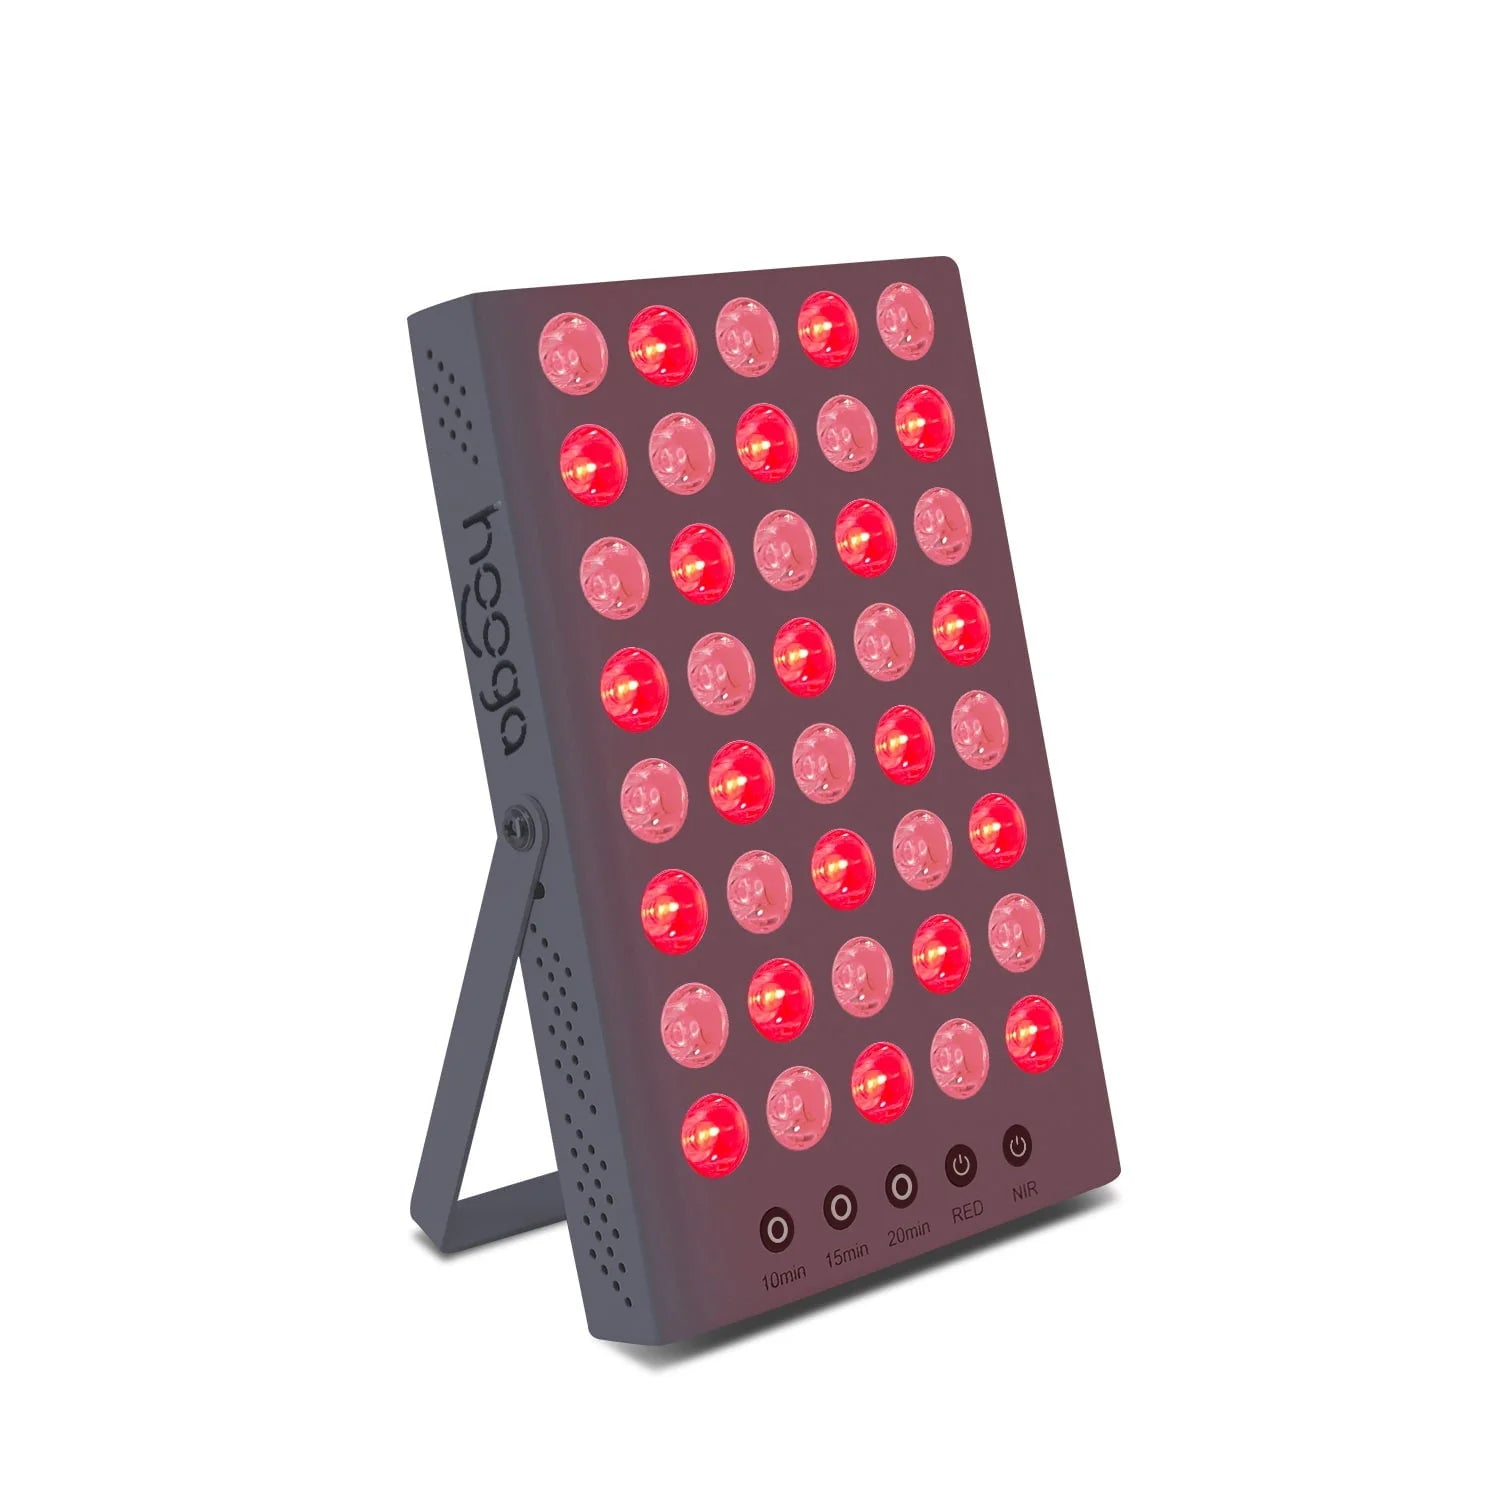 Hooga HG200 - Compact Red Light Therapy Device